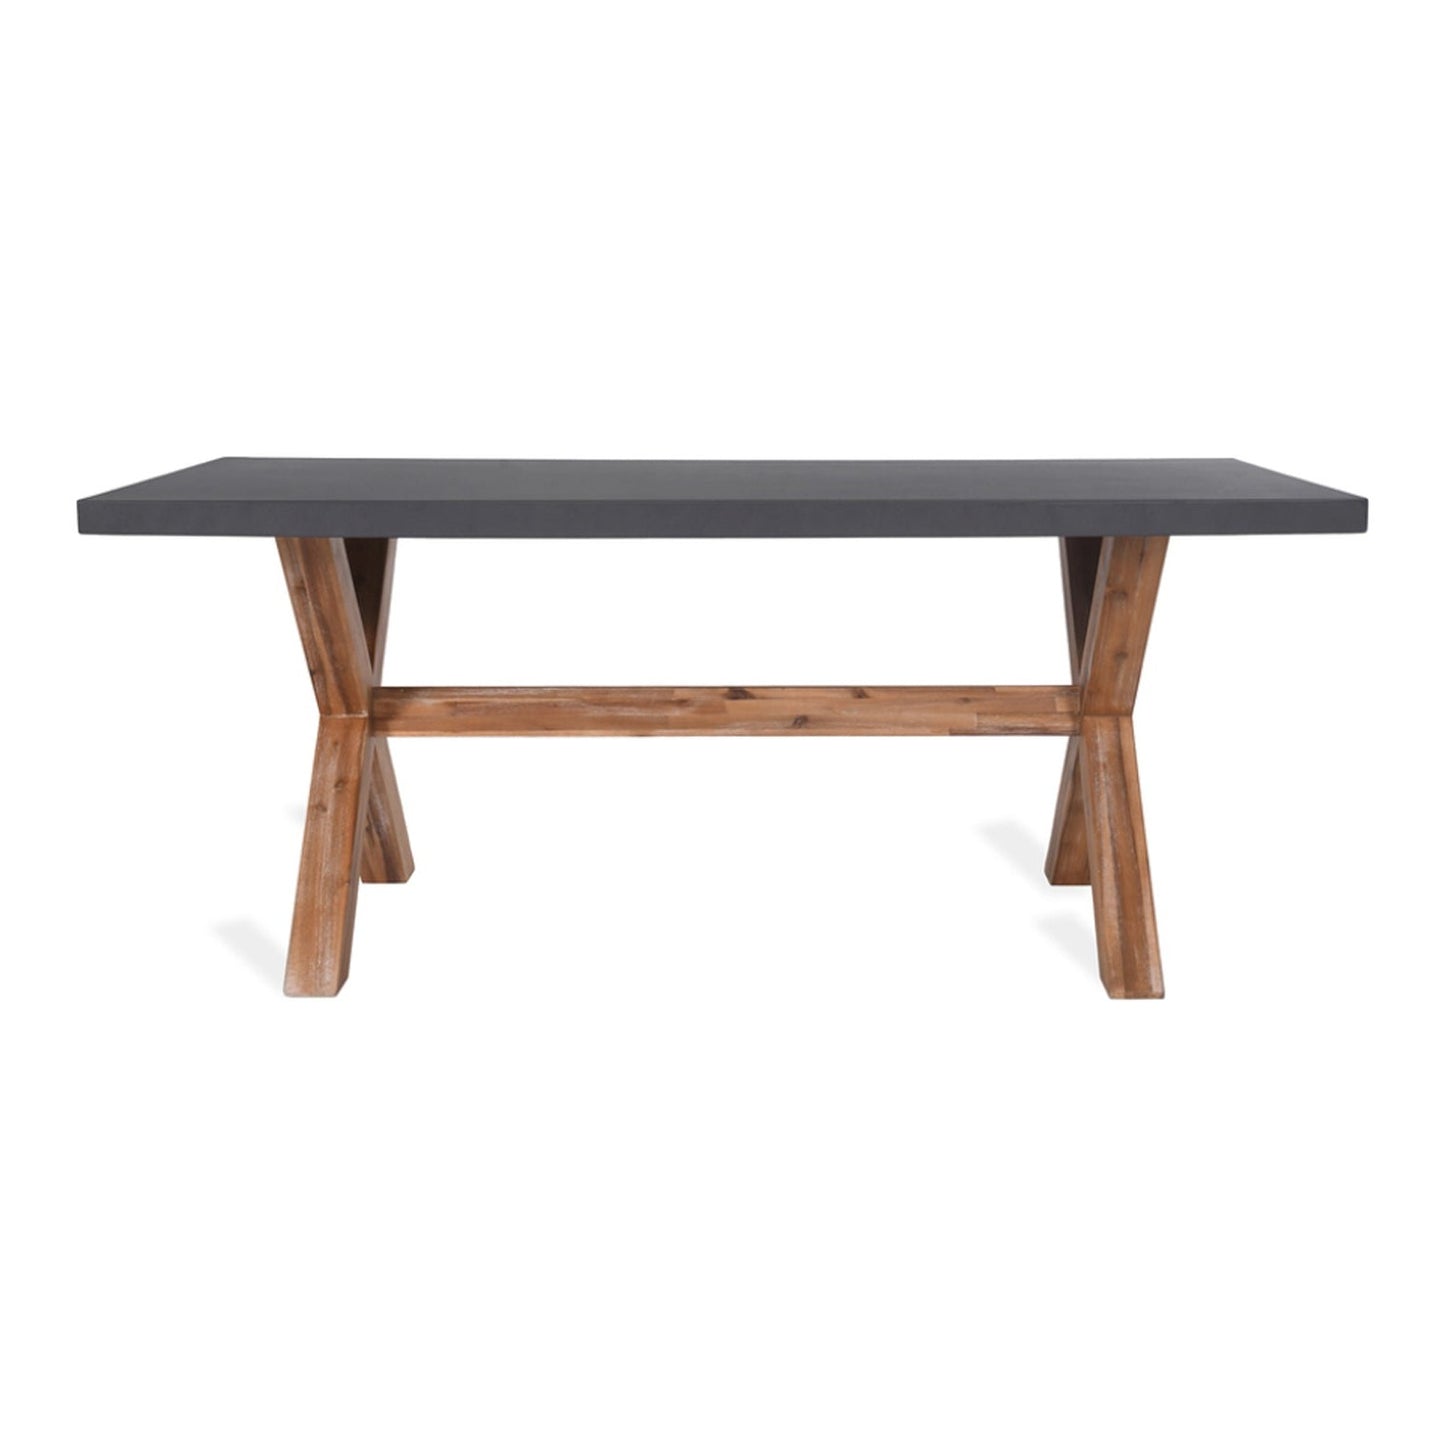 Burford Outdoor Table Small Grey Polystone by Garden Trading